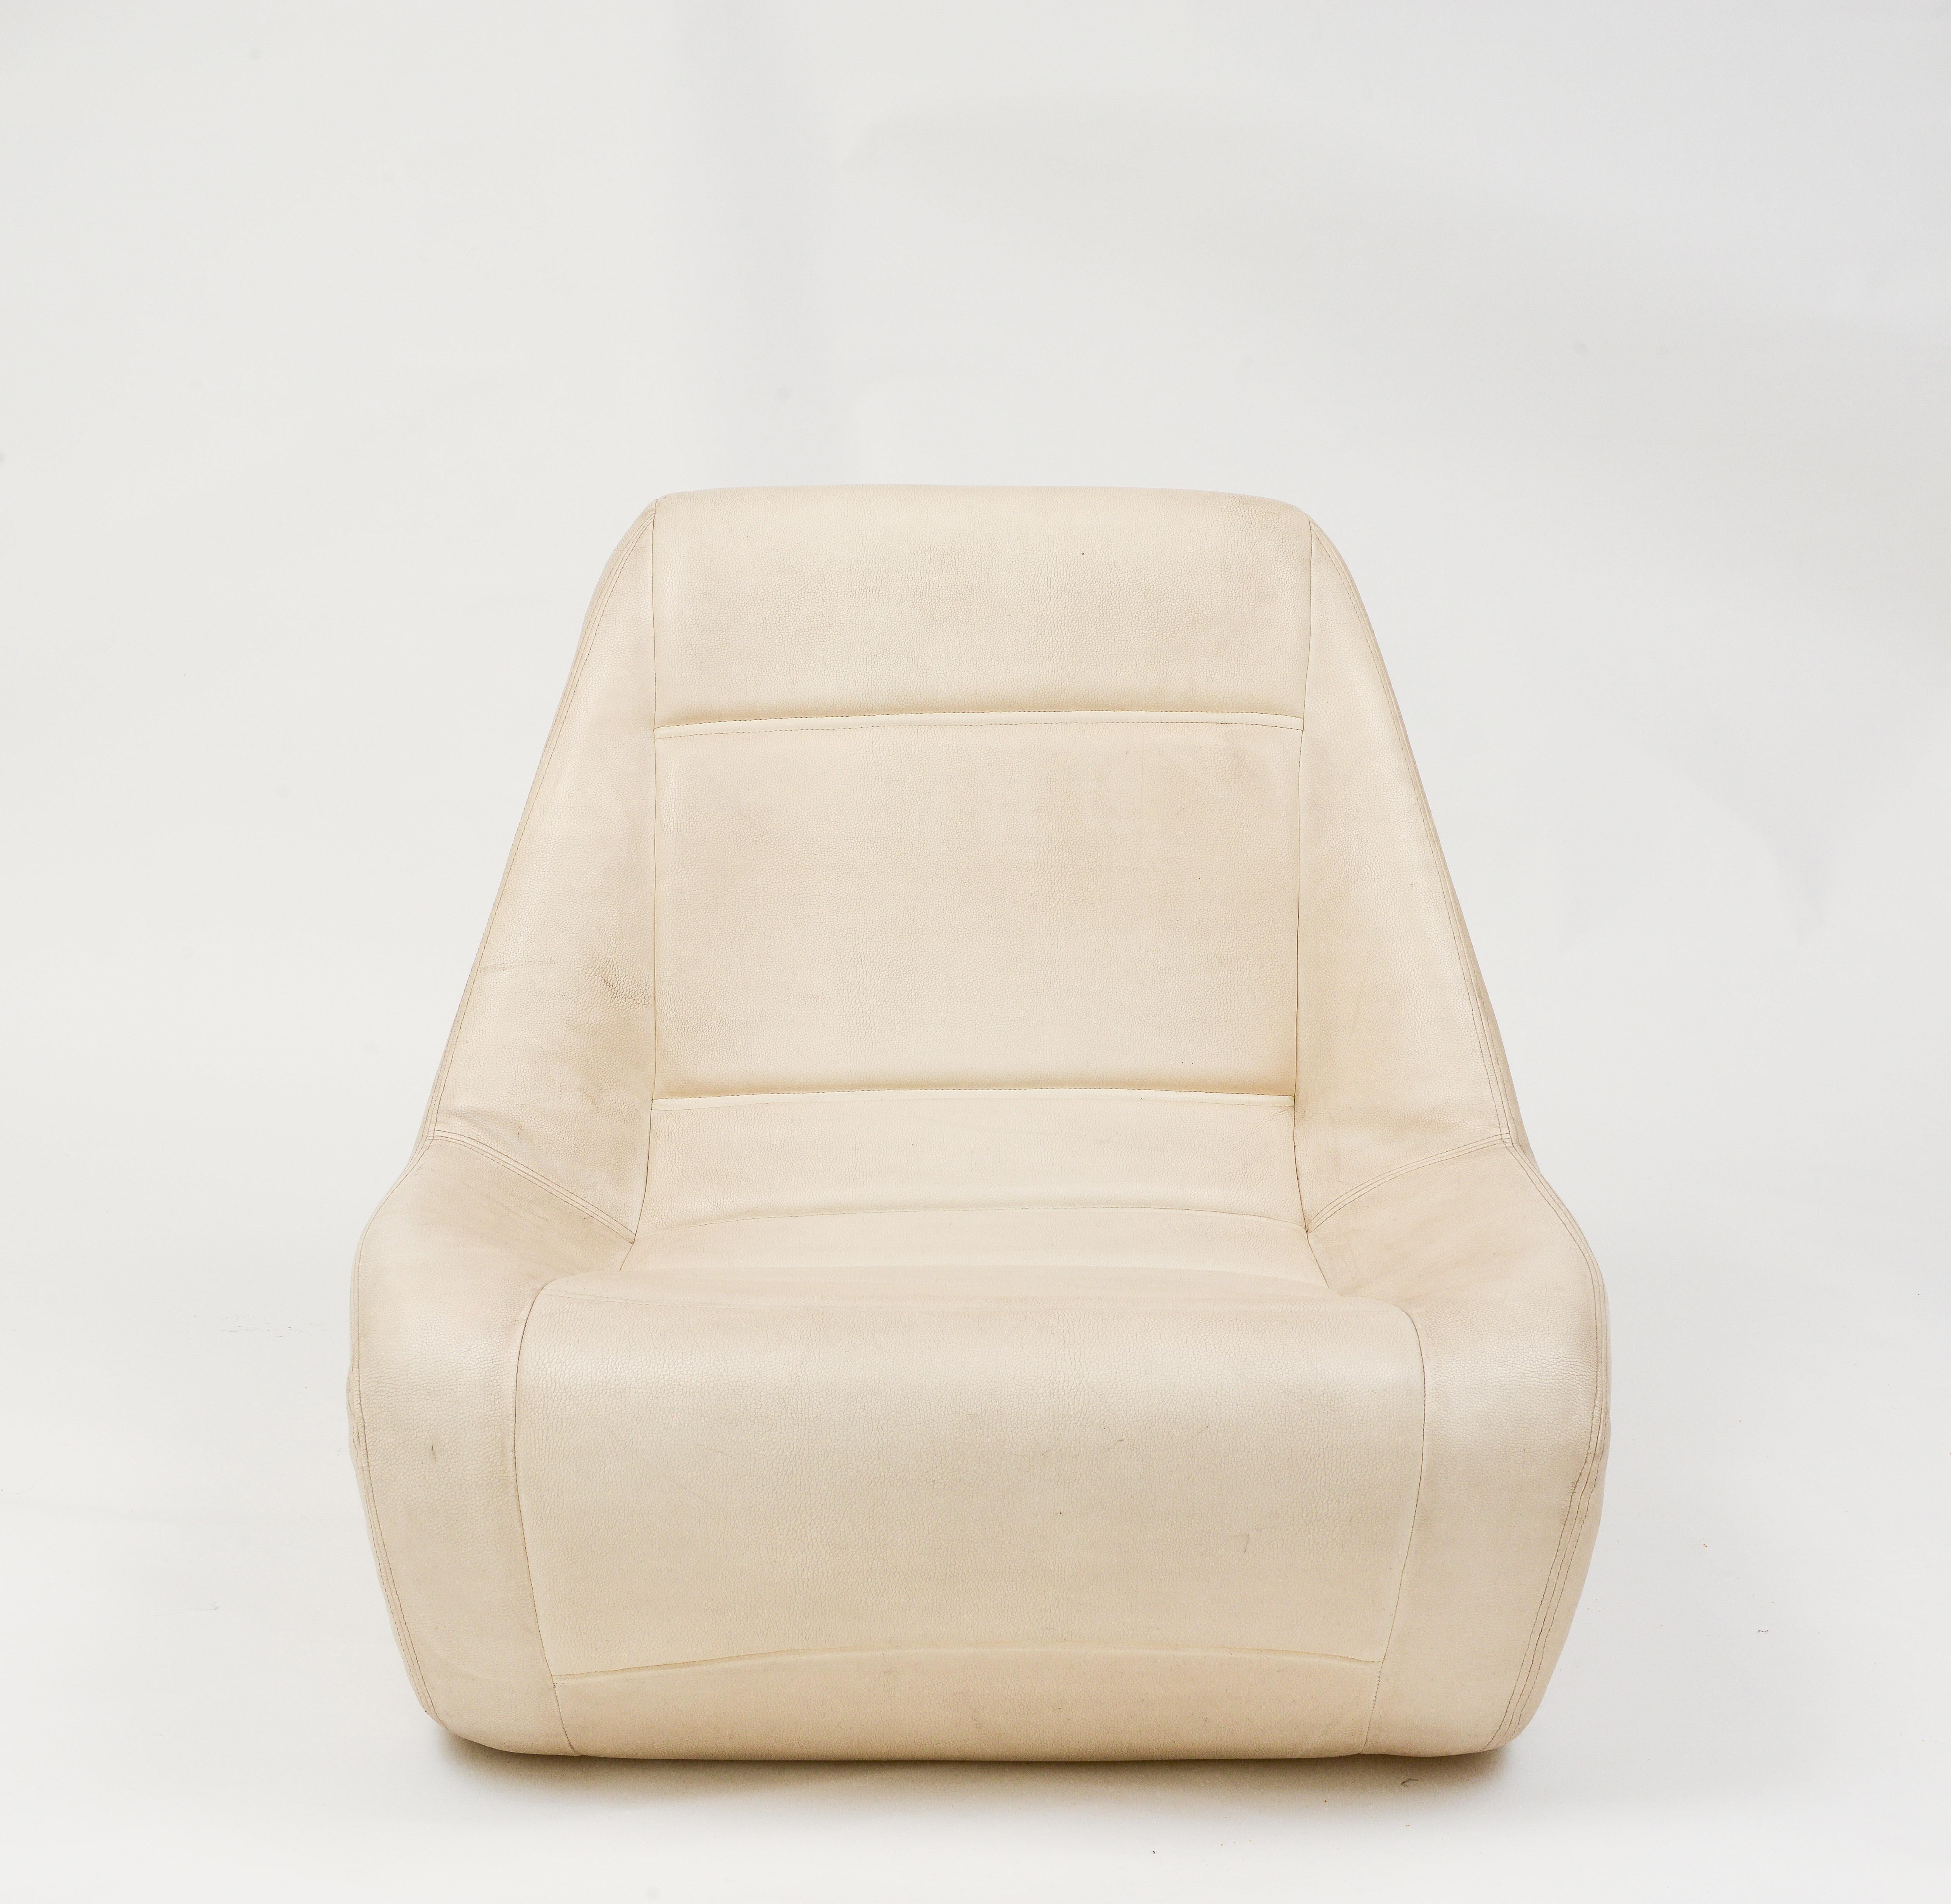 French Space Age Huge Lounge Chairs White Leatherette, France, 1970's